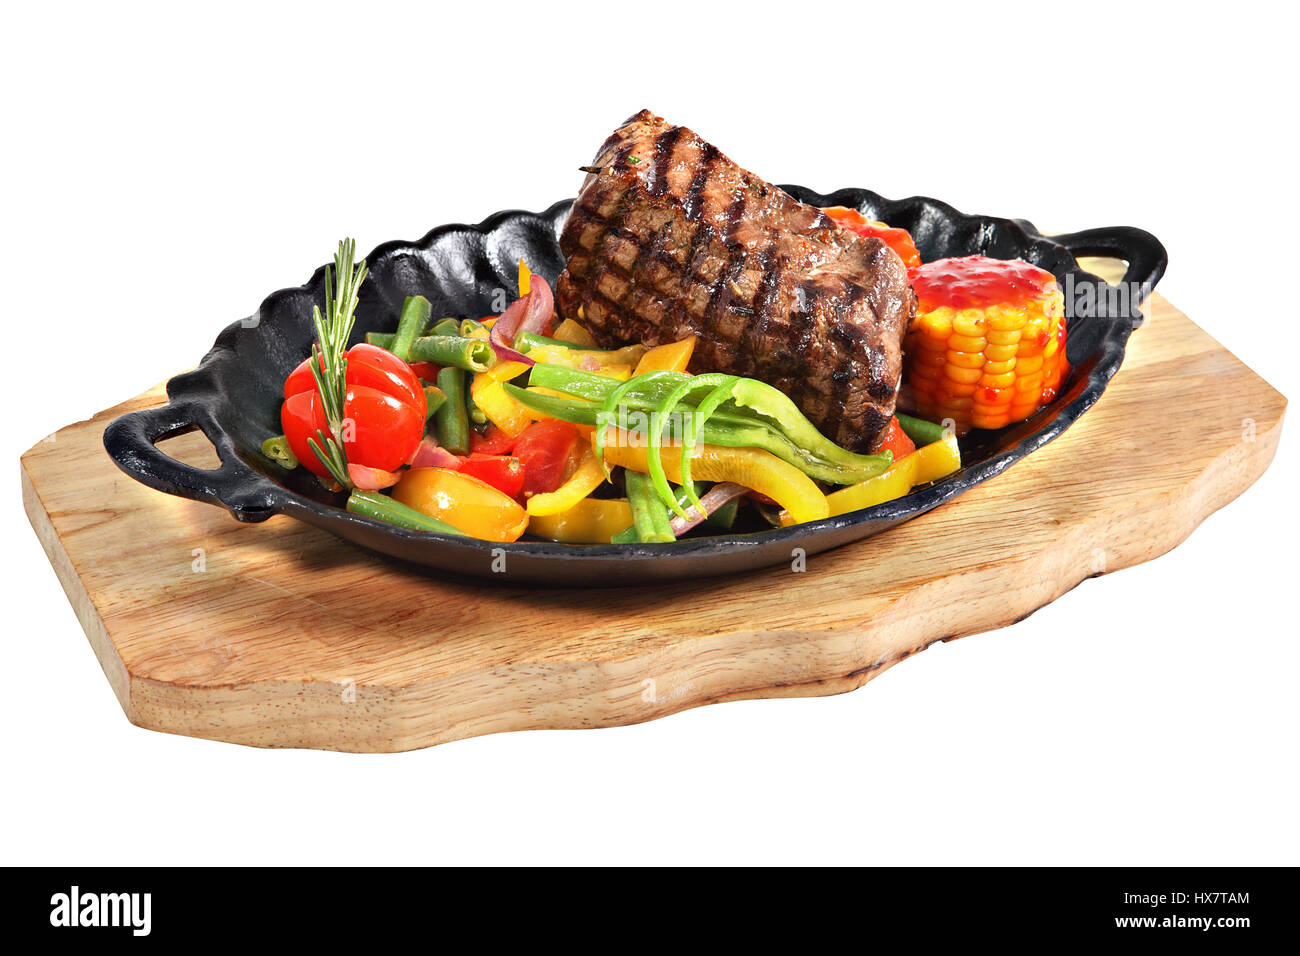 https://c8.alamy.com/comp/HX7TAM/mexican-steak-in-cast-iron-oval-serving-dish-with-handles-on-a-wooden-HX7TAM.jpg